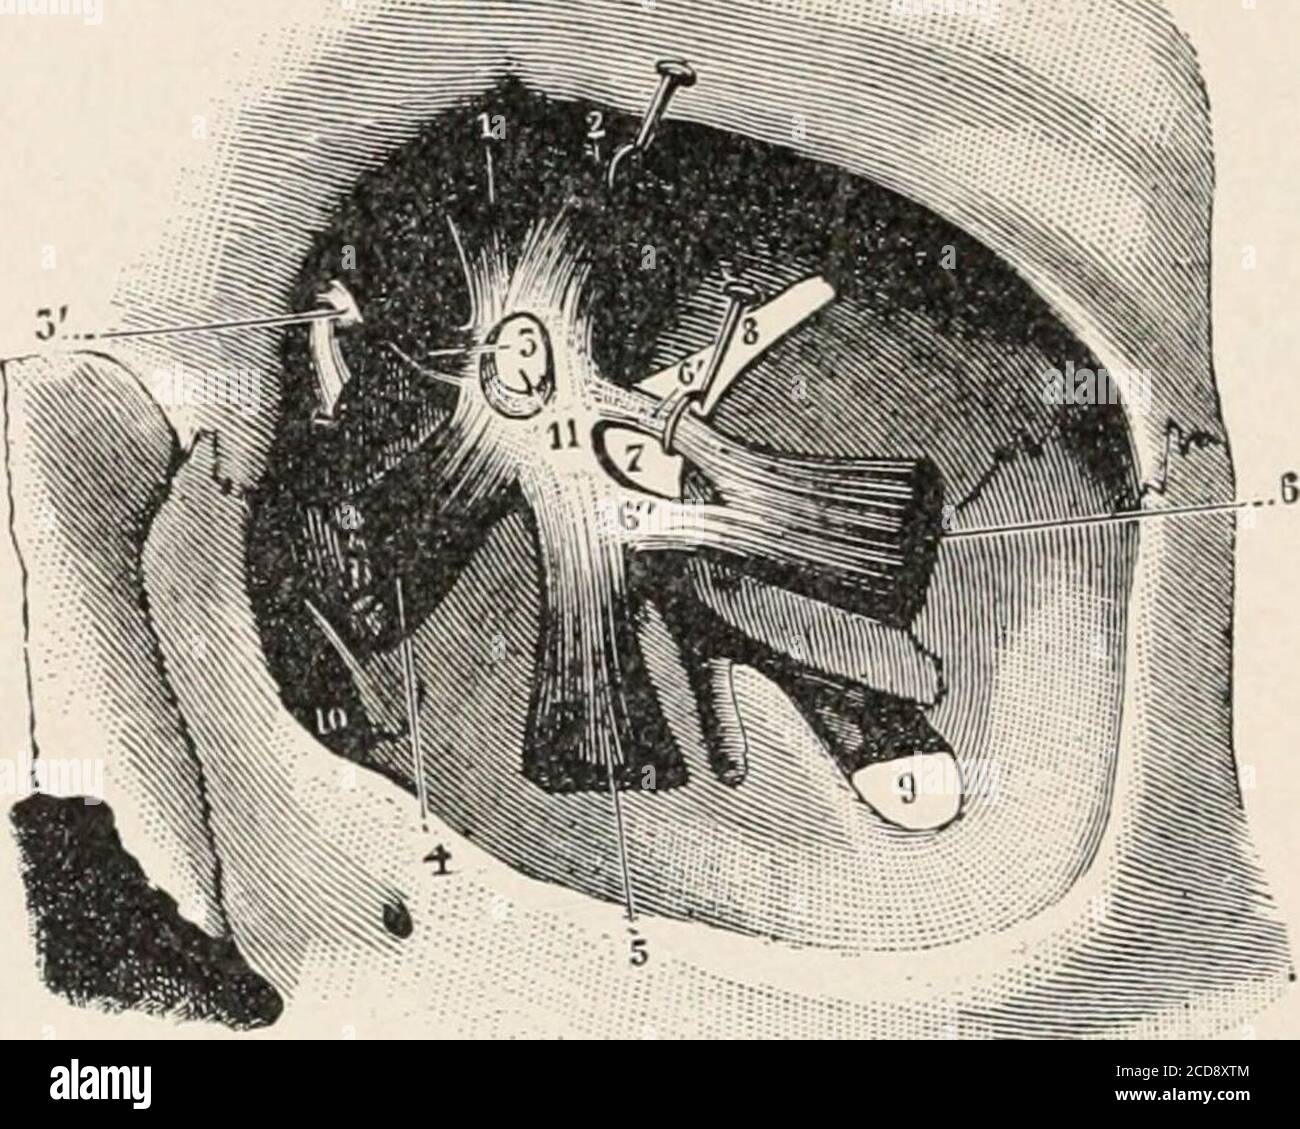 . A treatise on diseases of the eye . )()n-eurotic connective tissue attachments at the apex of the orbit. Internal Rectus.—This is the largest and strongest of the recti nuiscles;it is 41 mm. long, and weighs about 0.75 gram. It passes forward from 1 Ann. dOcul., vol. ci, p. 123. Miel and Benoit, Arch, dopht., vol. x.x. 4, p 101. 3G ANATOMY the apex of the orbit, nearly parallel to the inner wall of the orbit, to theequator of the globe; it is inserted into the sclera 6.5 to 7 mm. from themargin of the cornea. The insertion is in a slightly curved line, convexitytoward the cornea. The width o Stock Photo